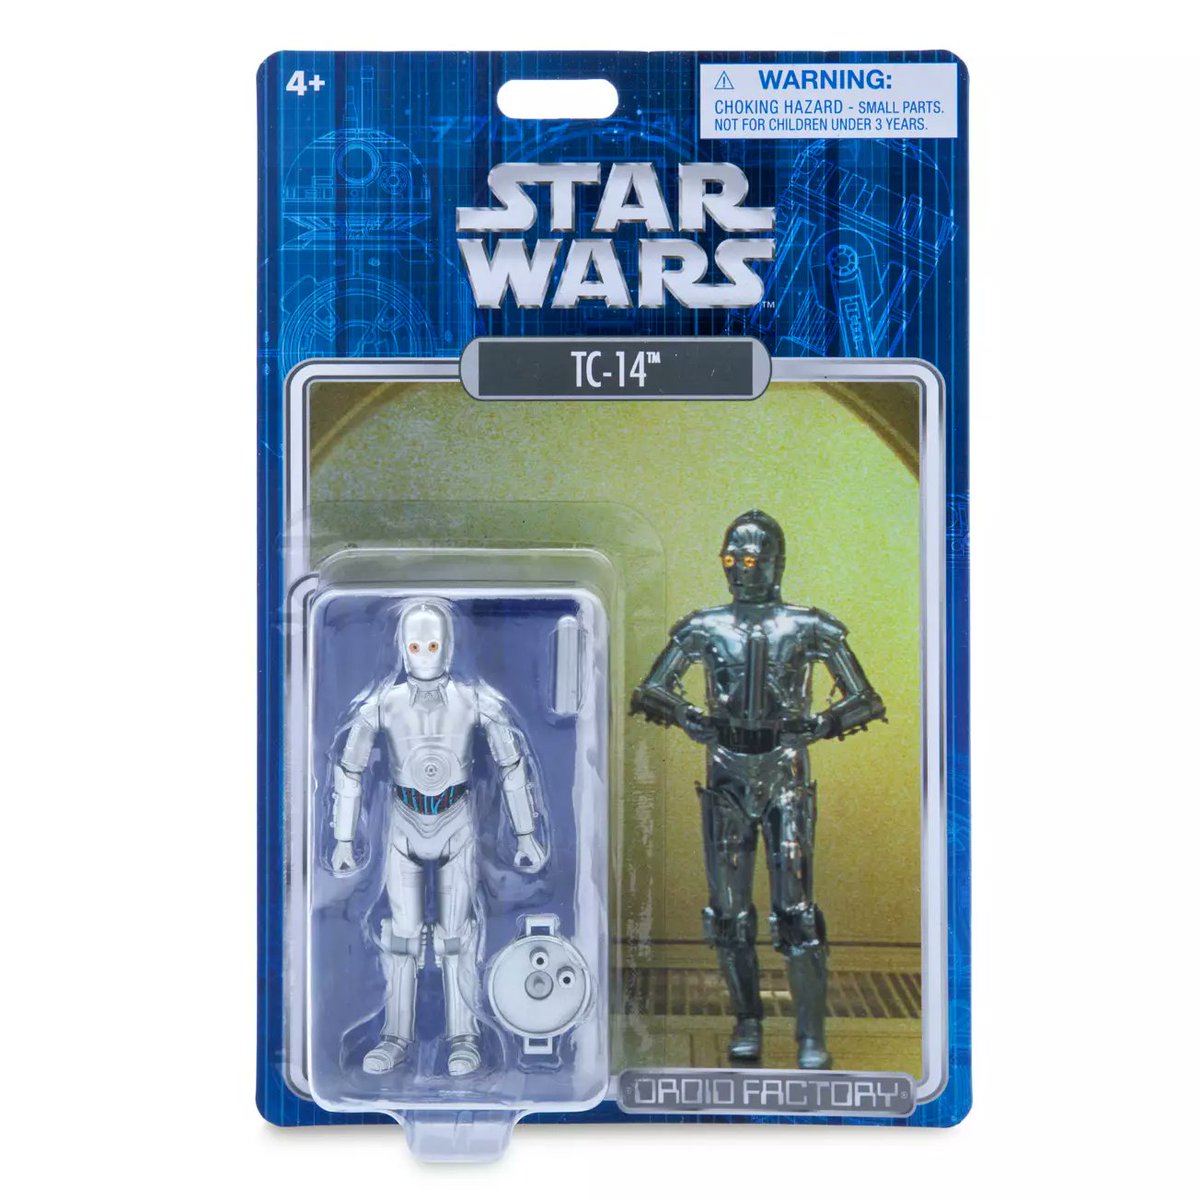 UK collectors. Droid Factory TC-14 is available on Shop Disney - bit.ly/3y6WSfC (affiliate) thanks to Joe Soap for the heads up. #StarWars #Maythe4thBeWithYou